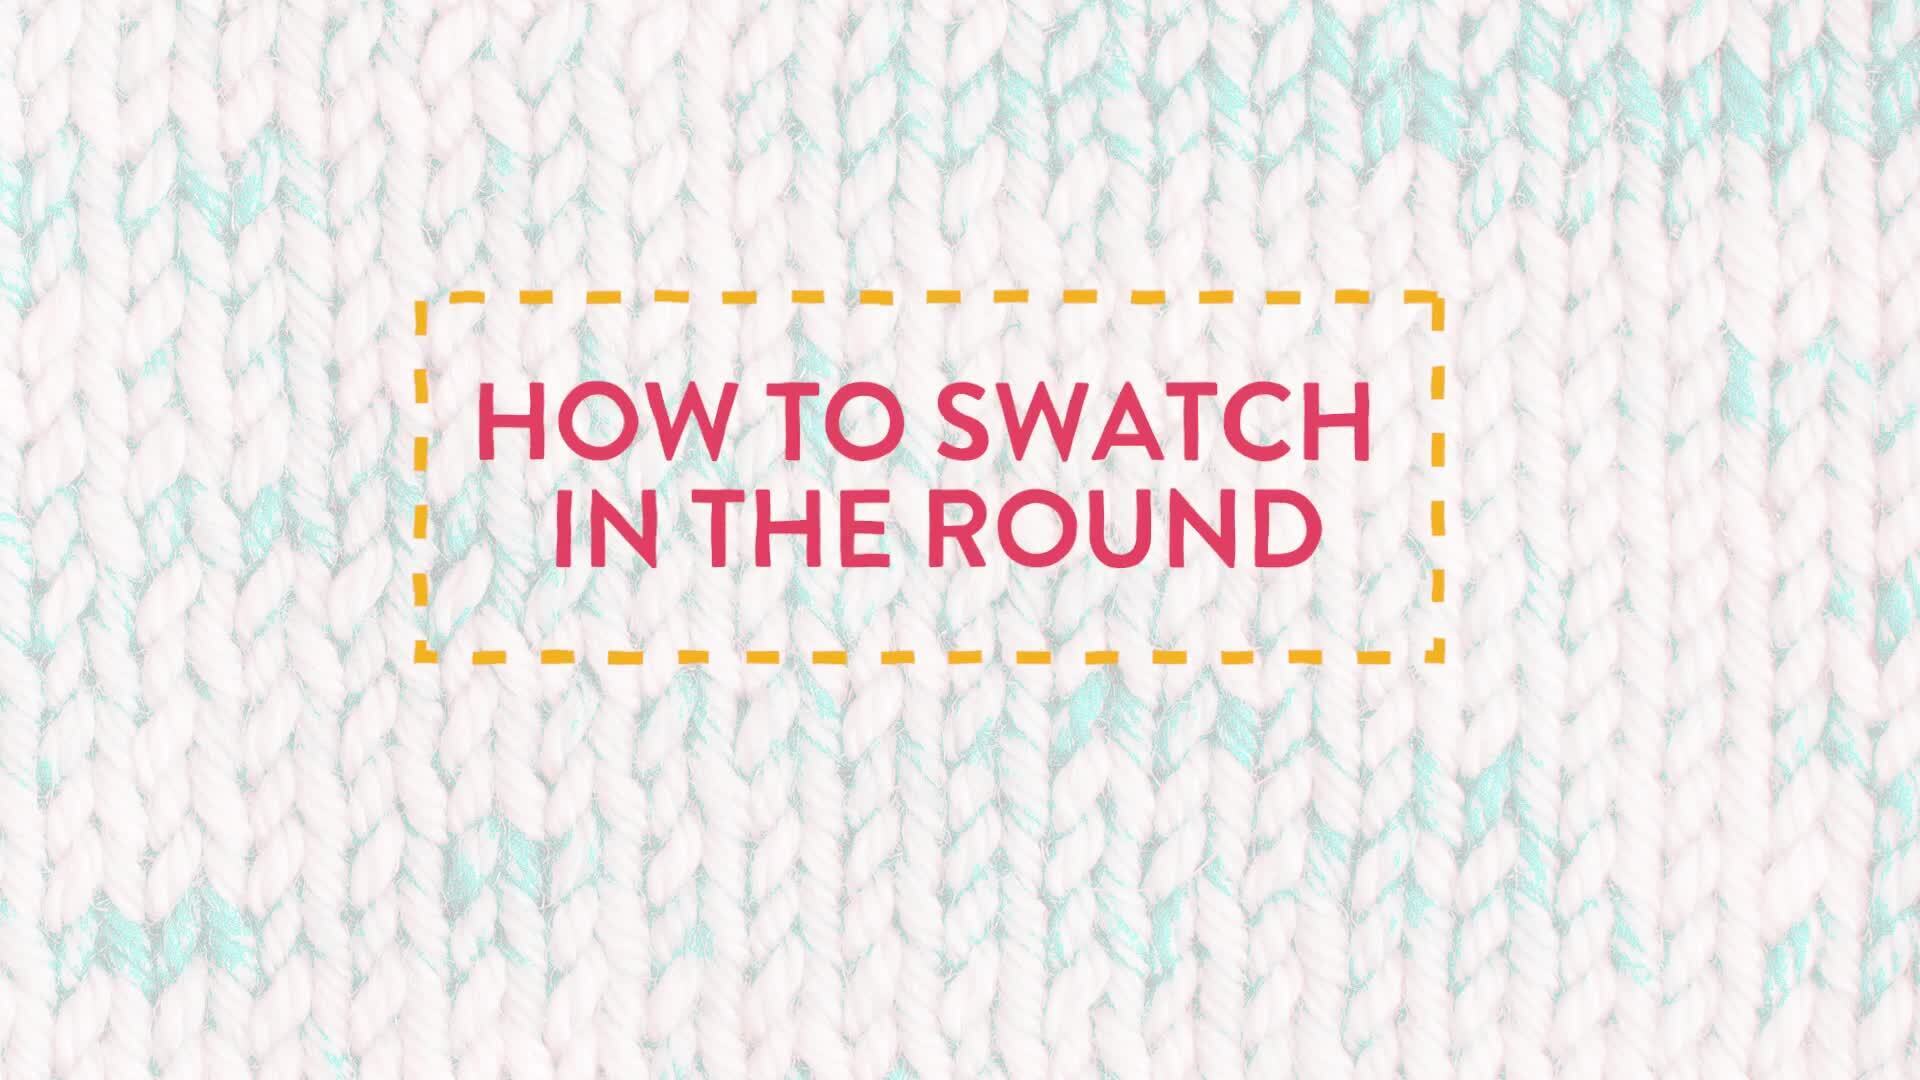 11 Swatching Secrets Every Knitter Should Know - PLUS How to Swatch in the Round!